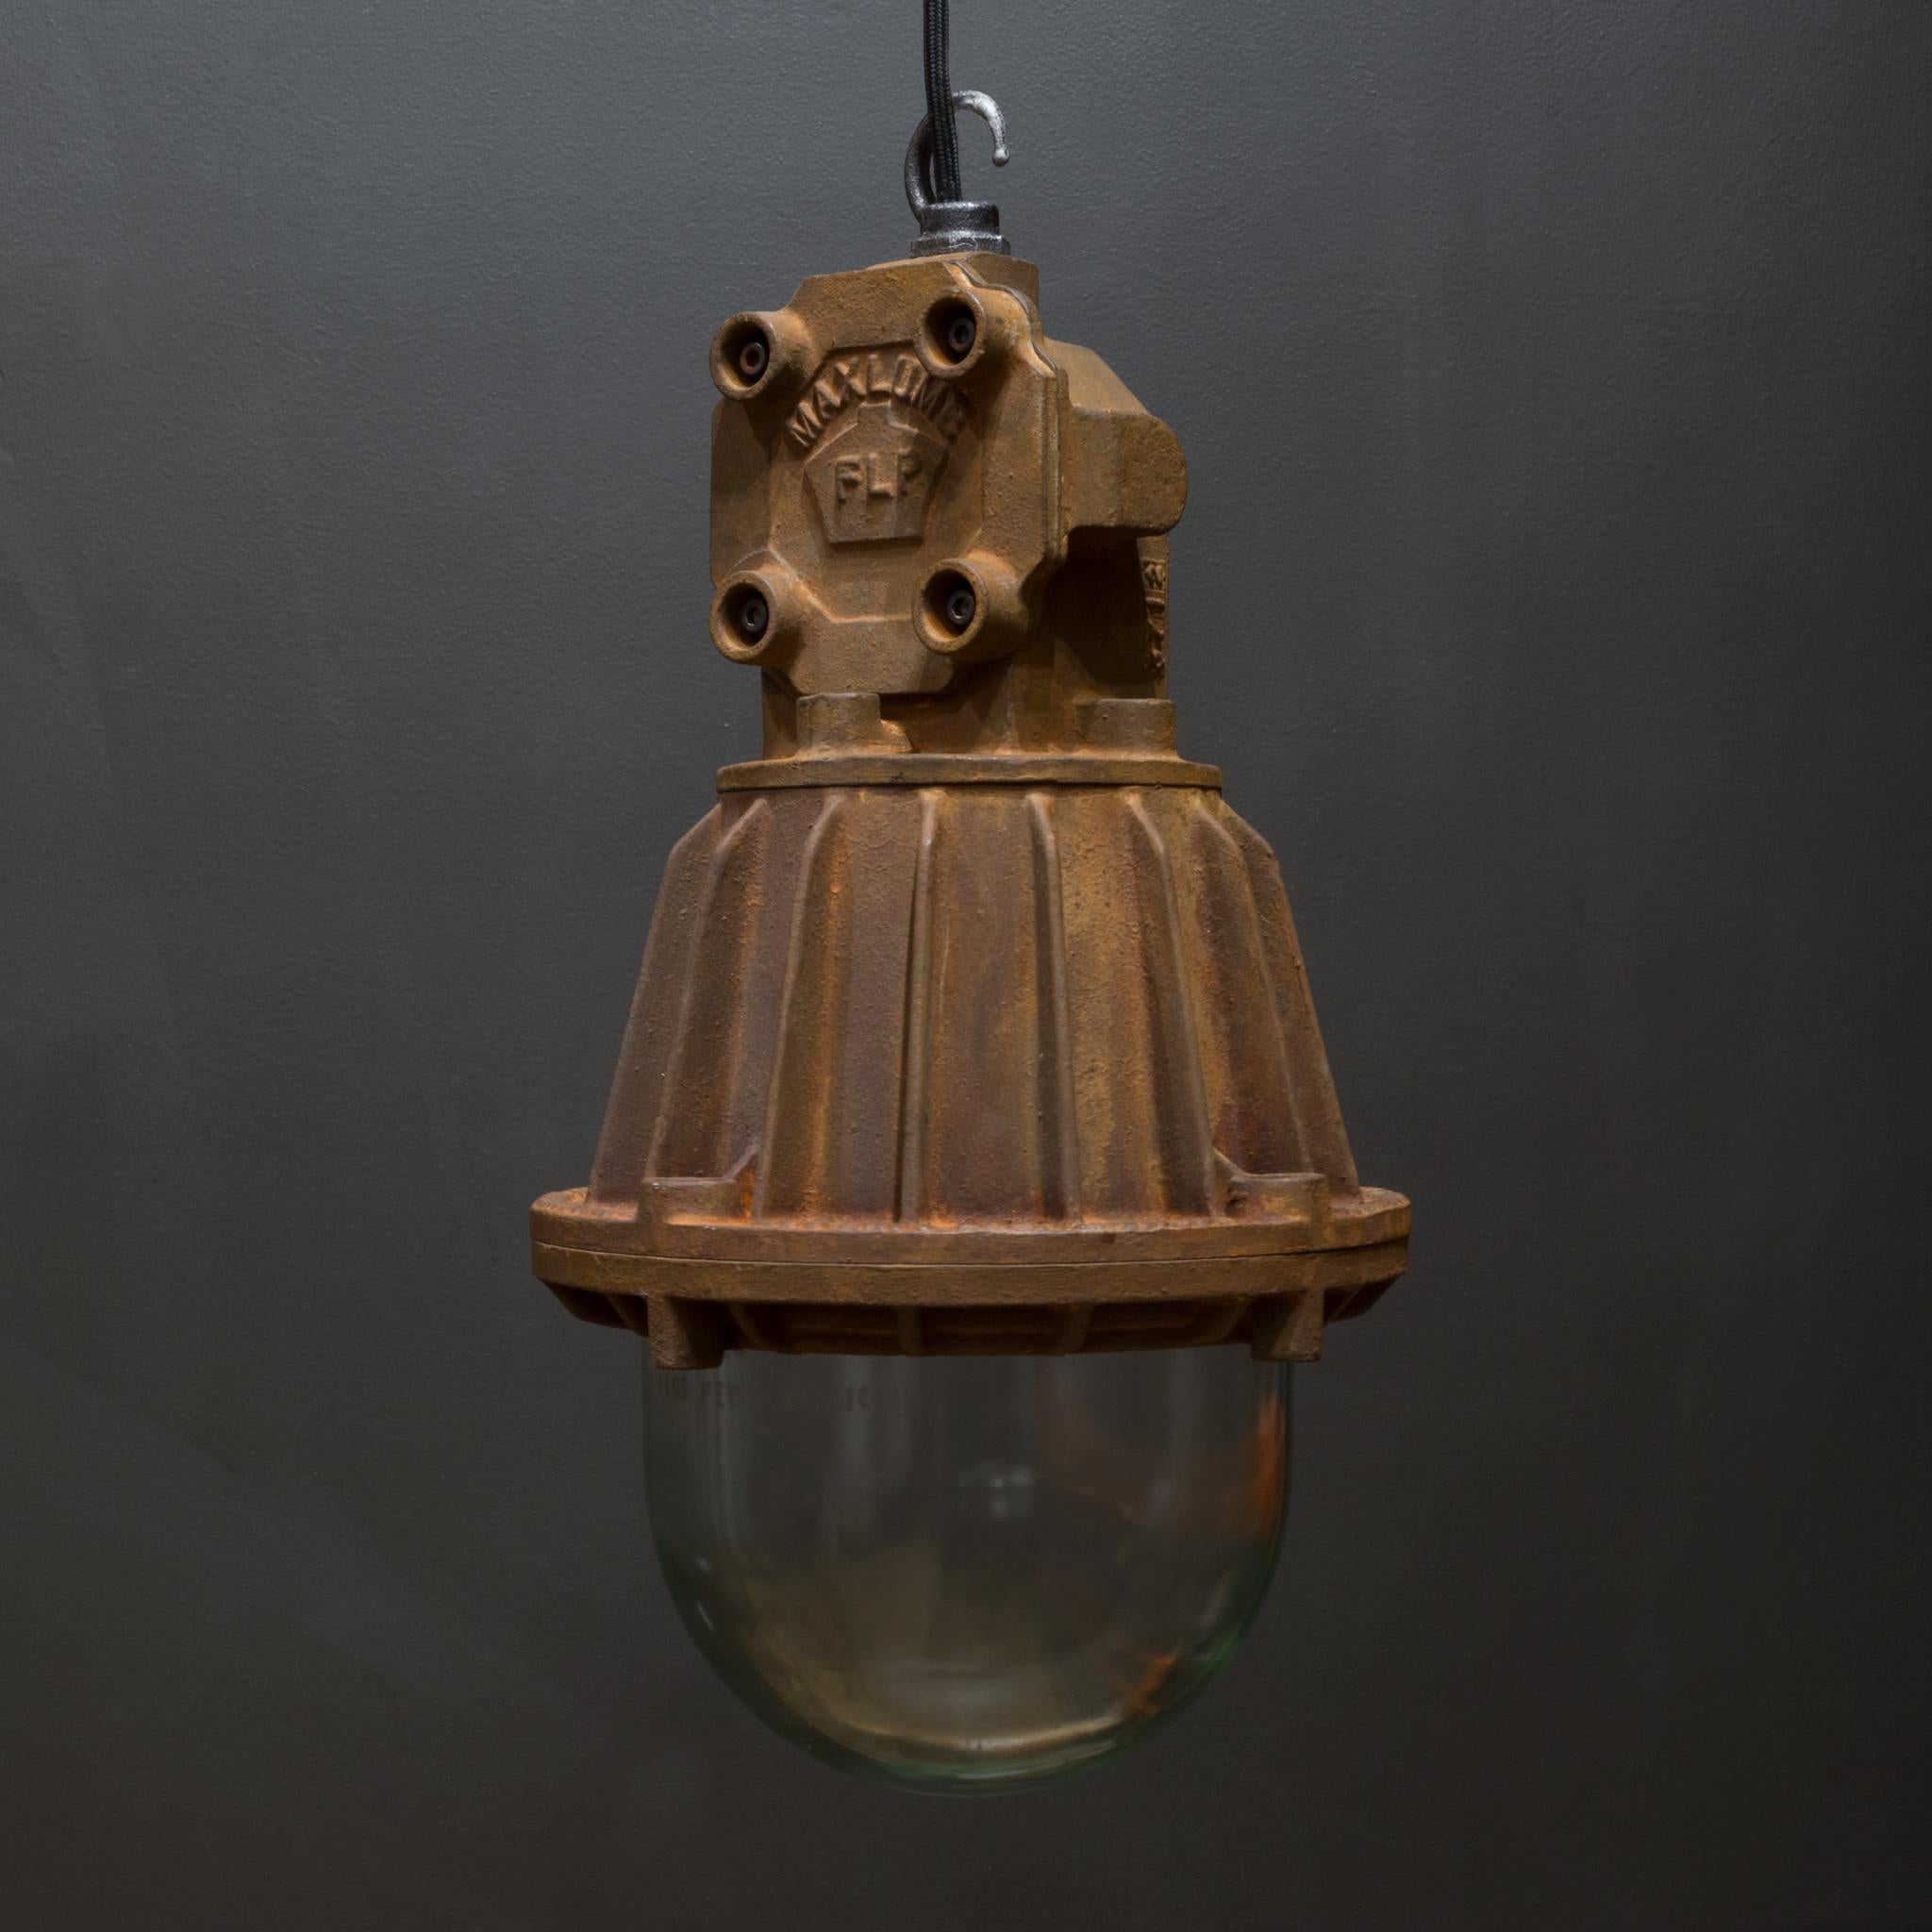 About

An original English industrial factory pendant light made from heavy cast steel with glass dome. Manufactured in the UK by Maxlume, it was designed to be flameproof as it hung in highly flammable factories.

 Creator Maxlume, United Kingdom.